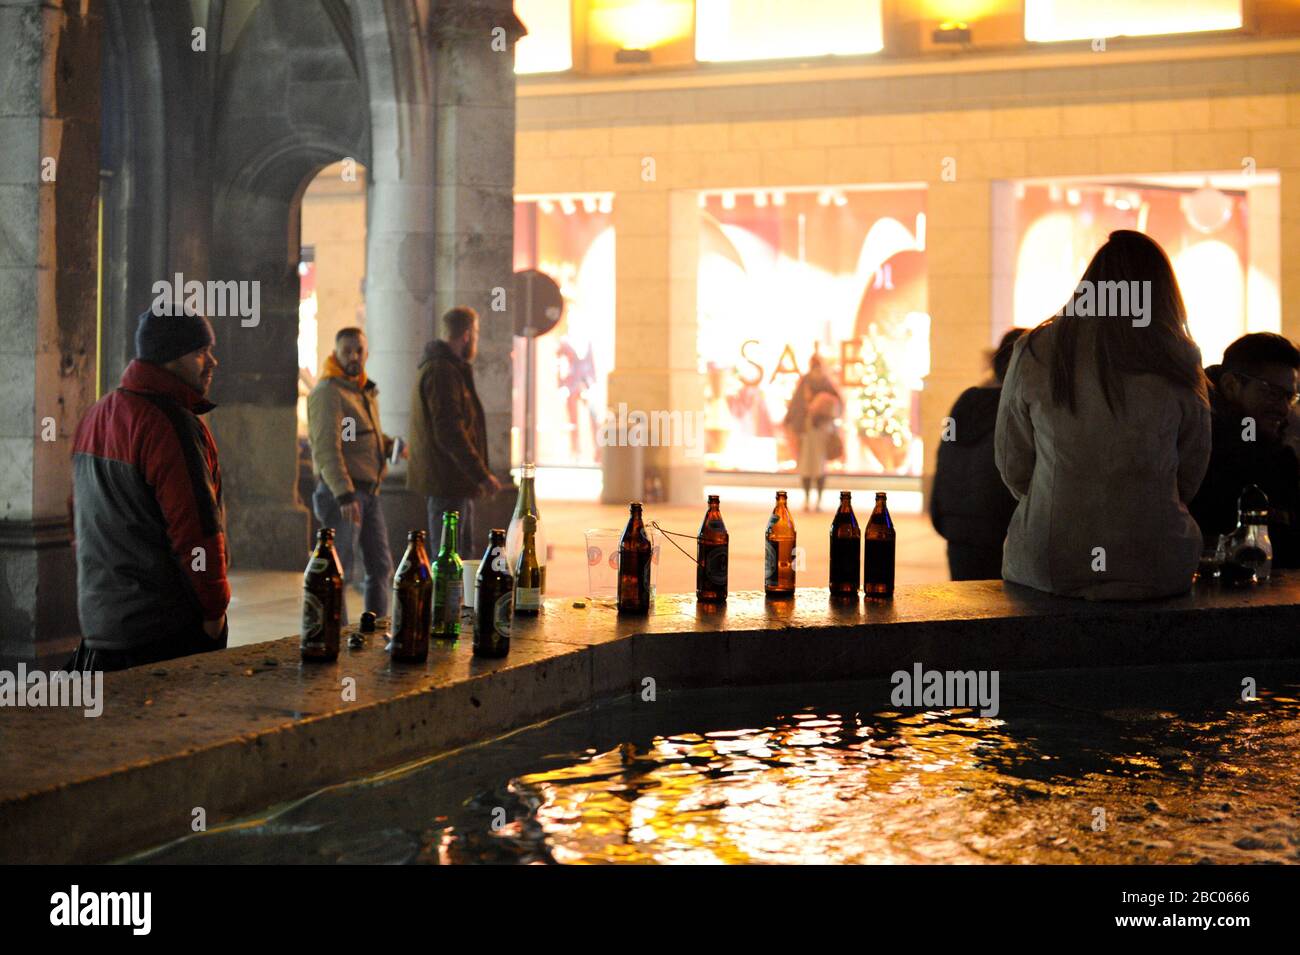 The first New Year's Eve night in Munich, where there is a complete ban on fireworks in the pedestrian zone and at Marienplatz. The S- and U-Bahn trains pass through Marienplatz station without stopping from 23.30 to 00.15 hrs. Here beer bottles on the Fischbrunnen. [automated translation] Stock Photo